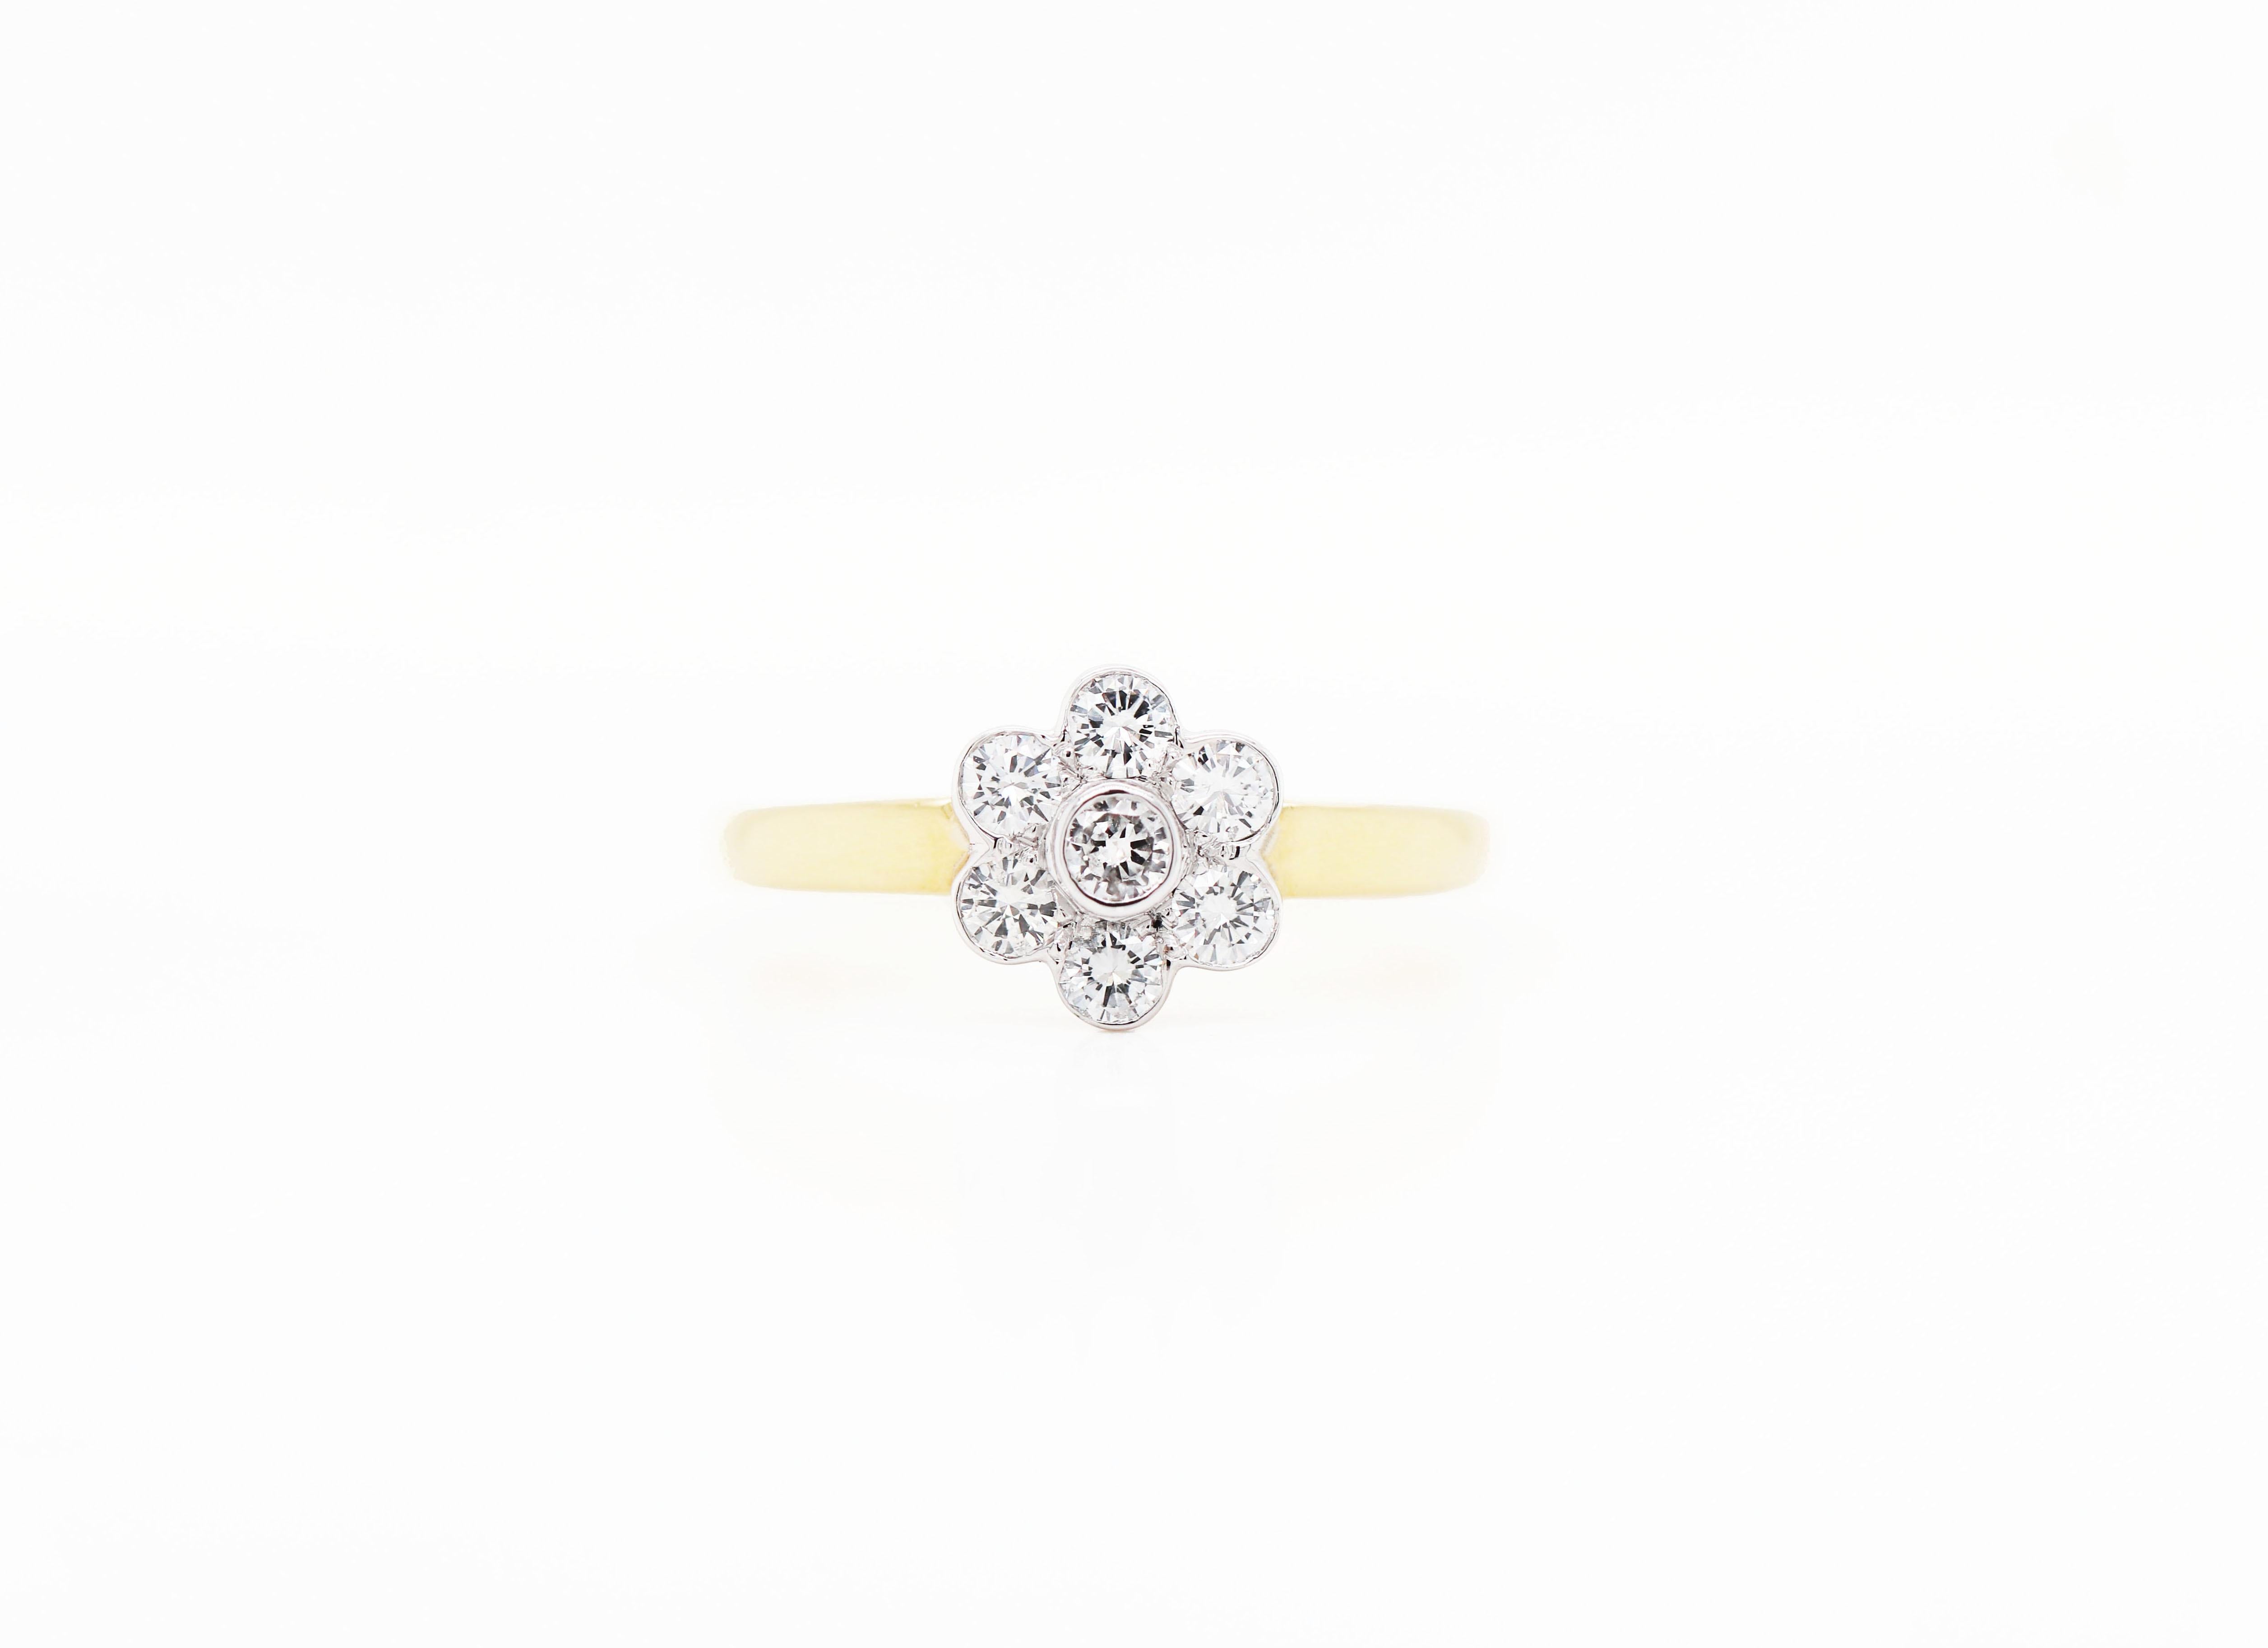 Lovely flower cluster ring set with 0.50 carat of fine quality brilliant cut diamonds in open back rub over settings. The flower is set in 18 carat white gold and sits atop an 18 carat yellow gold shank, hallmarked 750, UK finger size 'L'.



